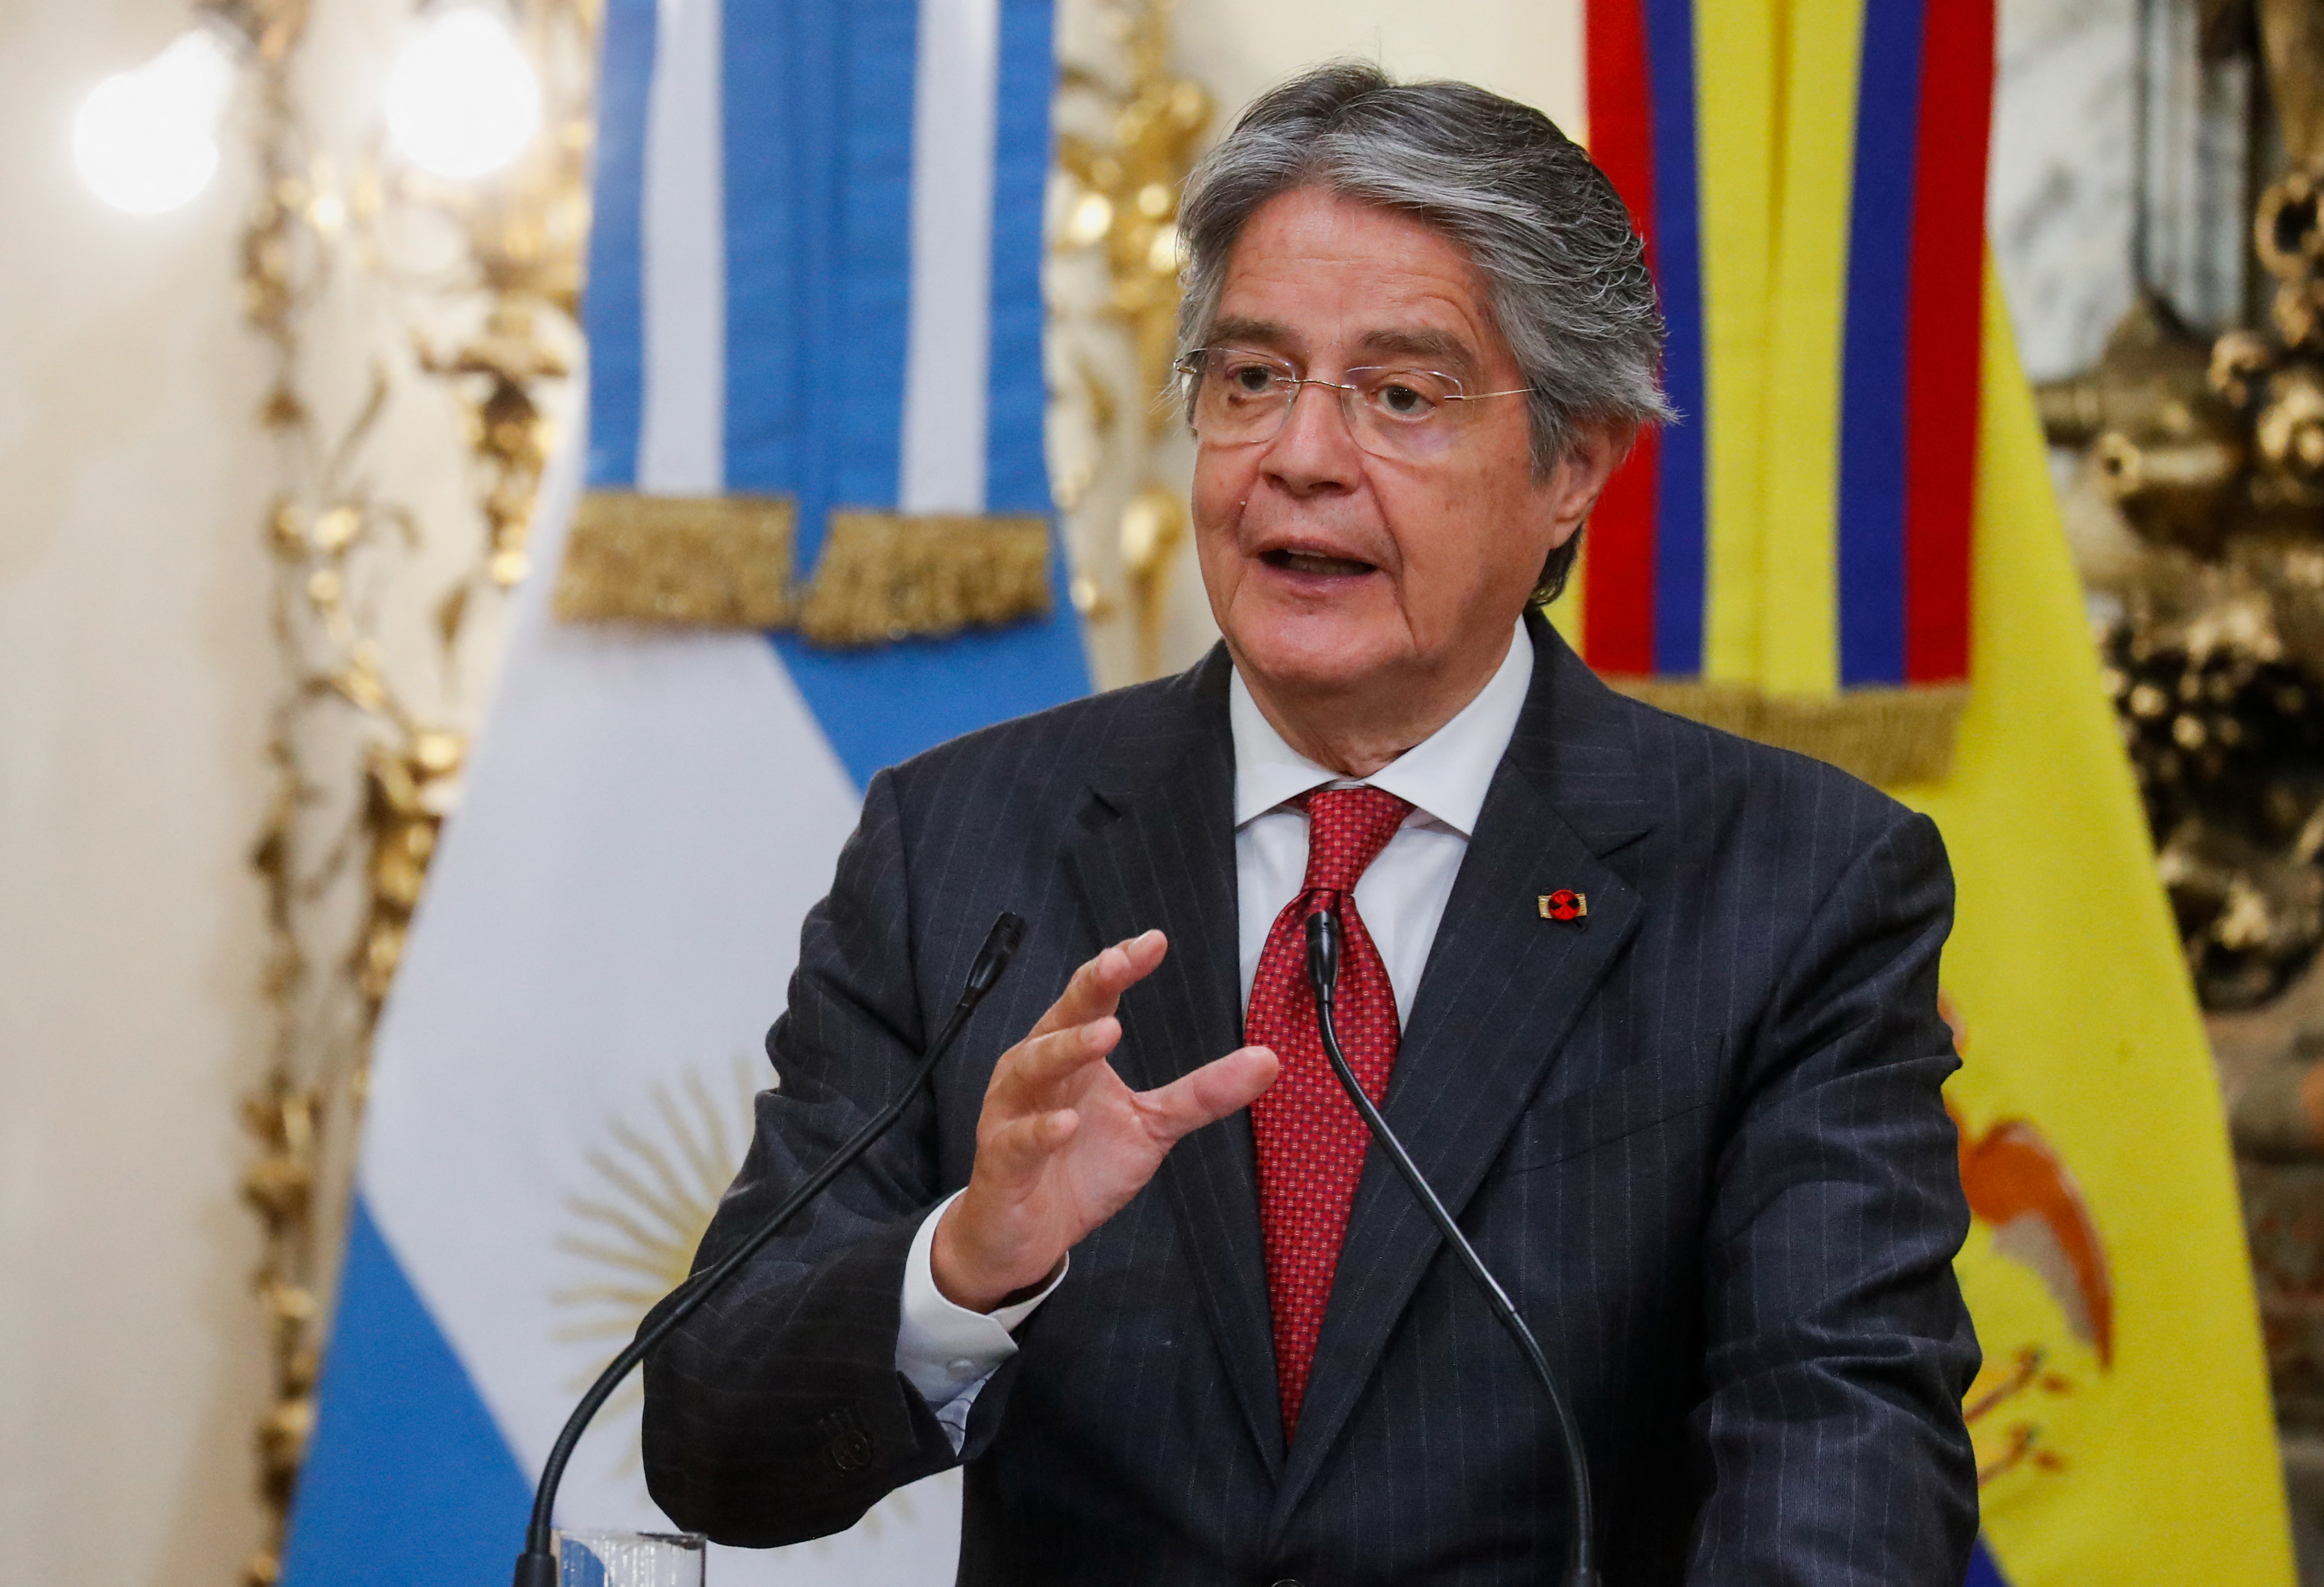 Ecuador's President Guillermo Lasso speaks as he attends a bilateral agreement signing ceremony with Argentina's President Alberto Fernandez (not pictured) at the Casa Rosada presidential palace in Buenos Aires, Argentina, April 18, 2022. REUTERS/Agustin Marcarian